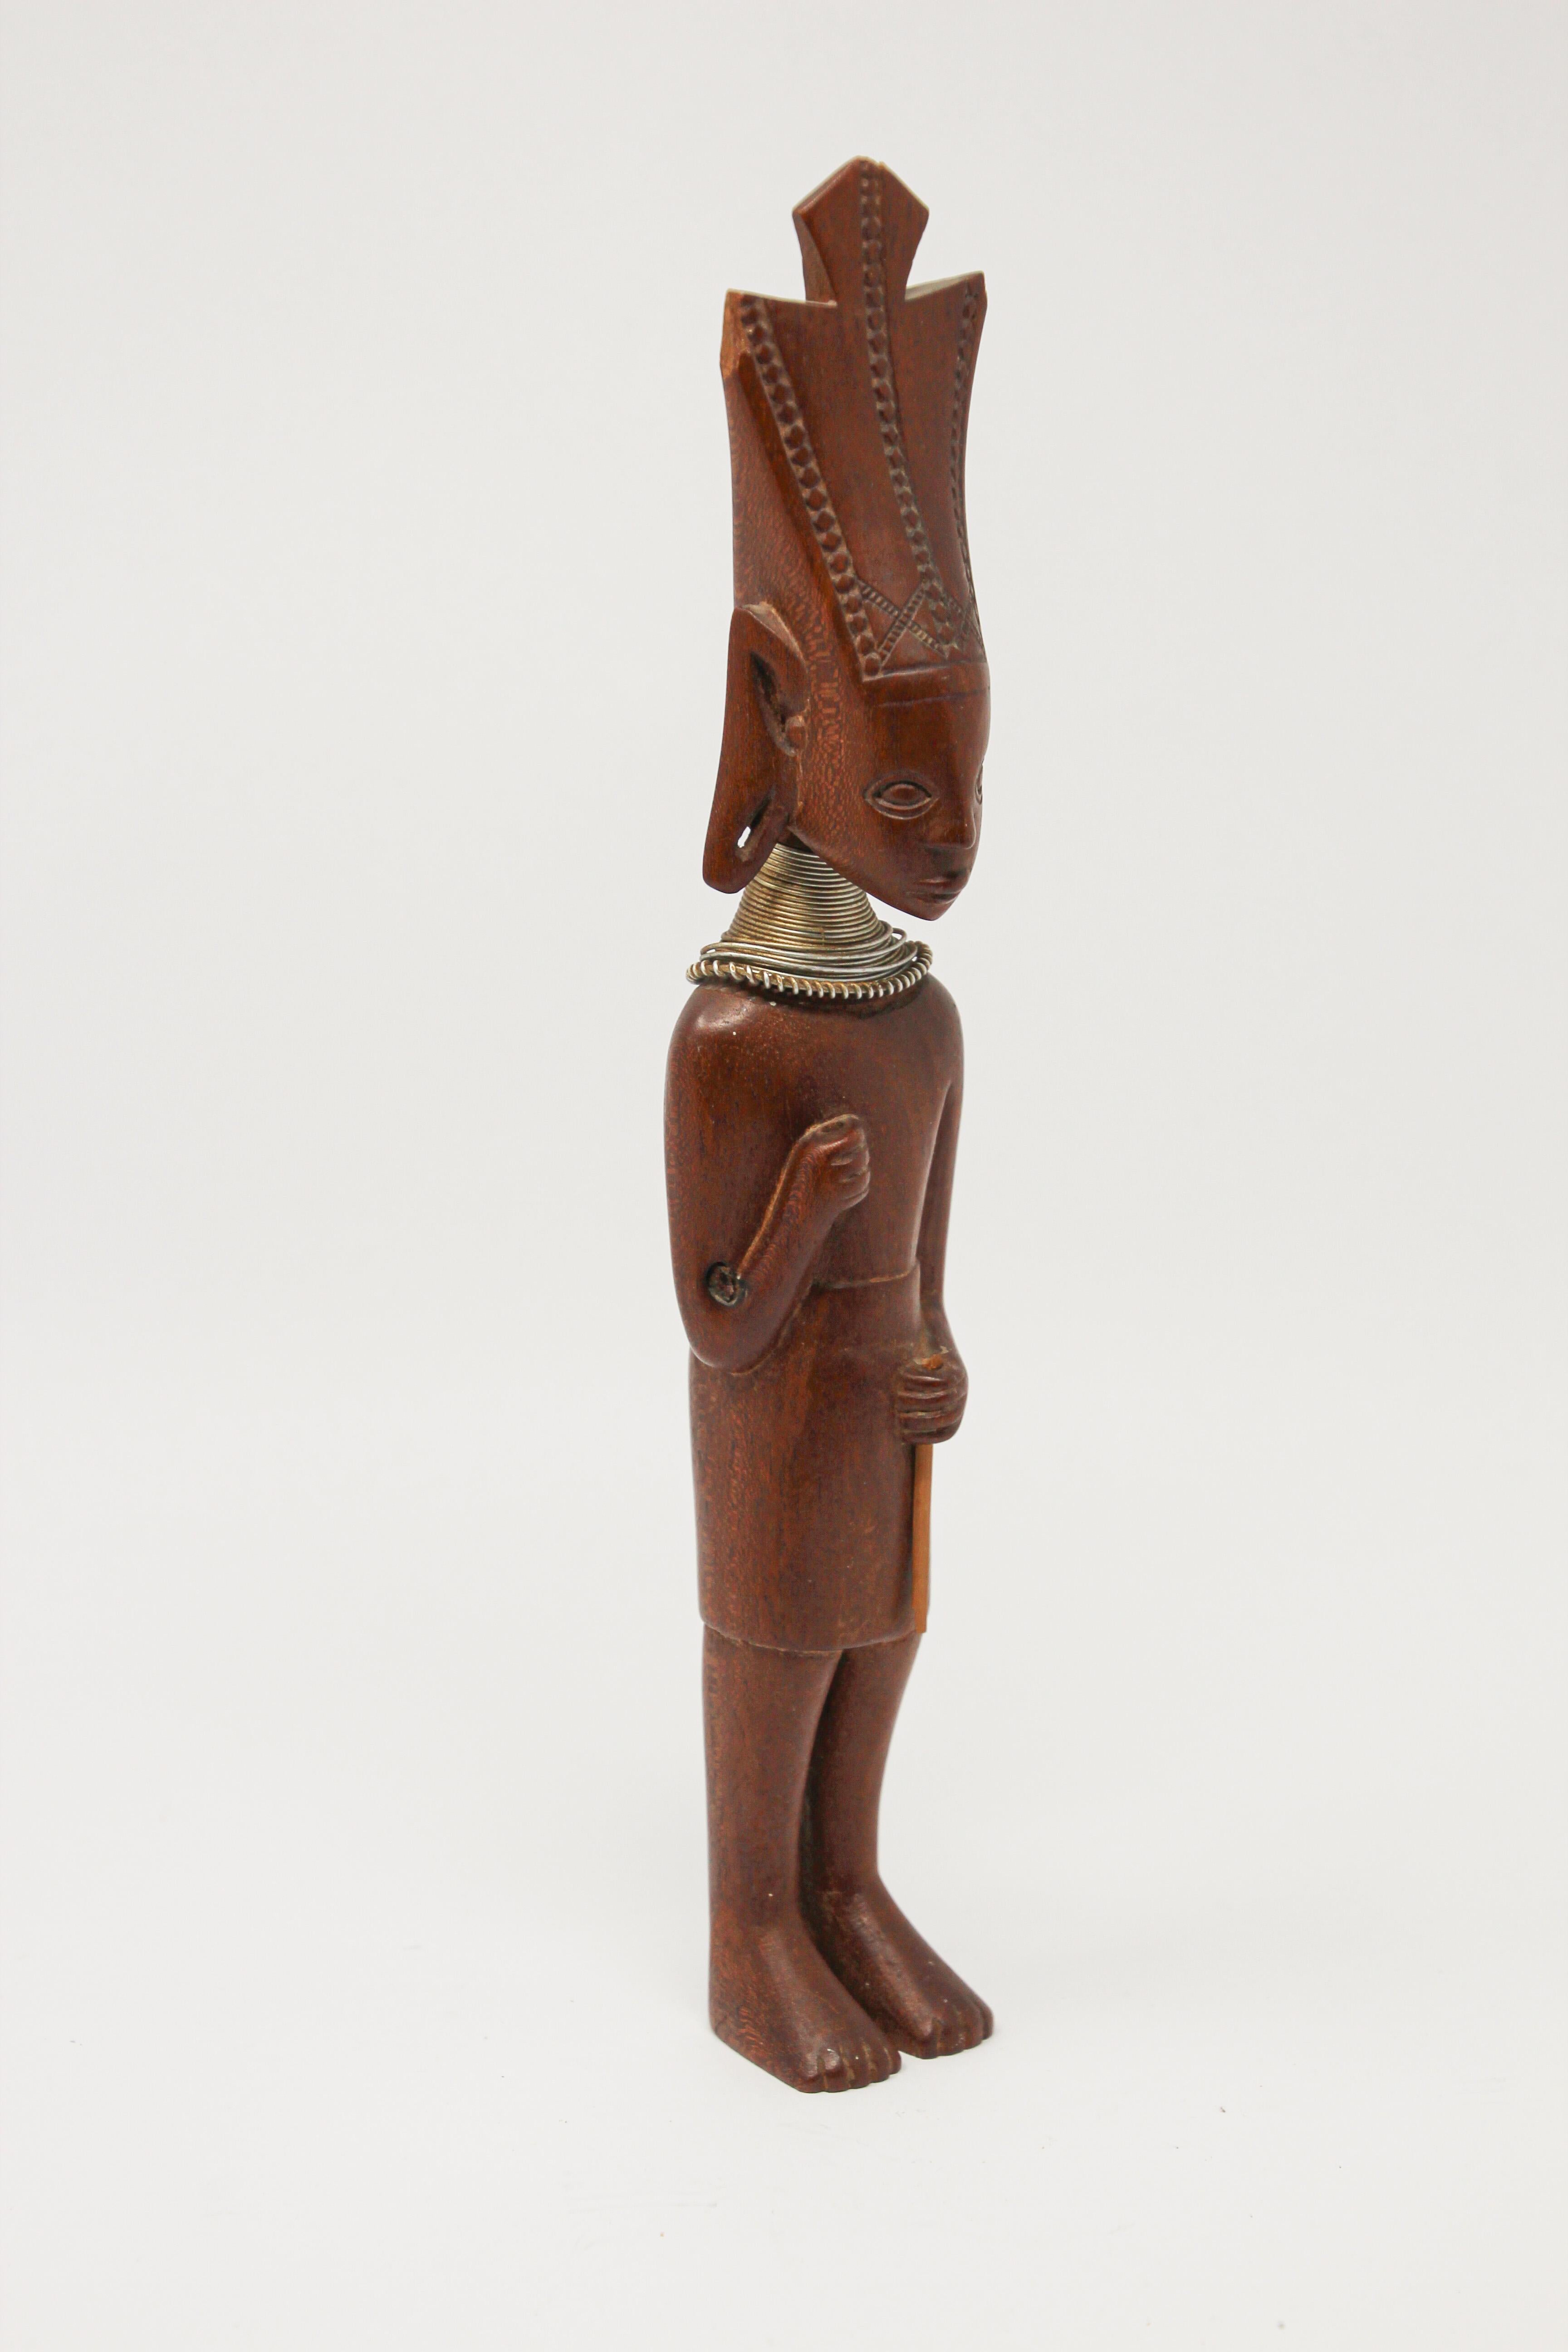 Hand carved West African tribal wood carved sculpture of a standing man, Africa tribal Art Decor.
Ndebele tribal sculpture featuring an elongated standing man with a crown and metal choker.
Very simple modern look carved ethnic